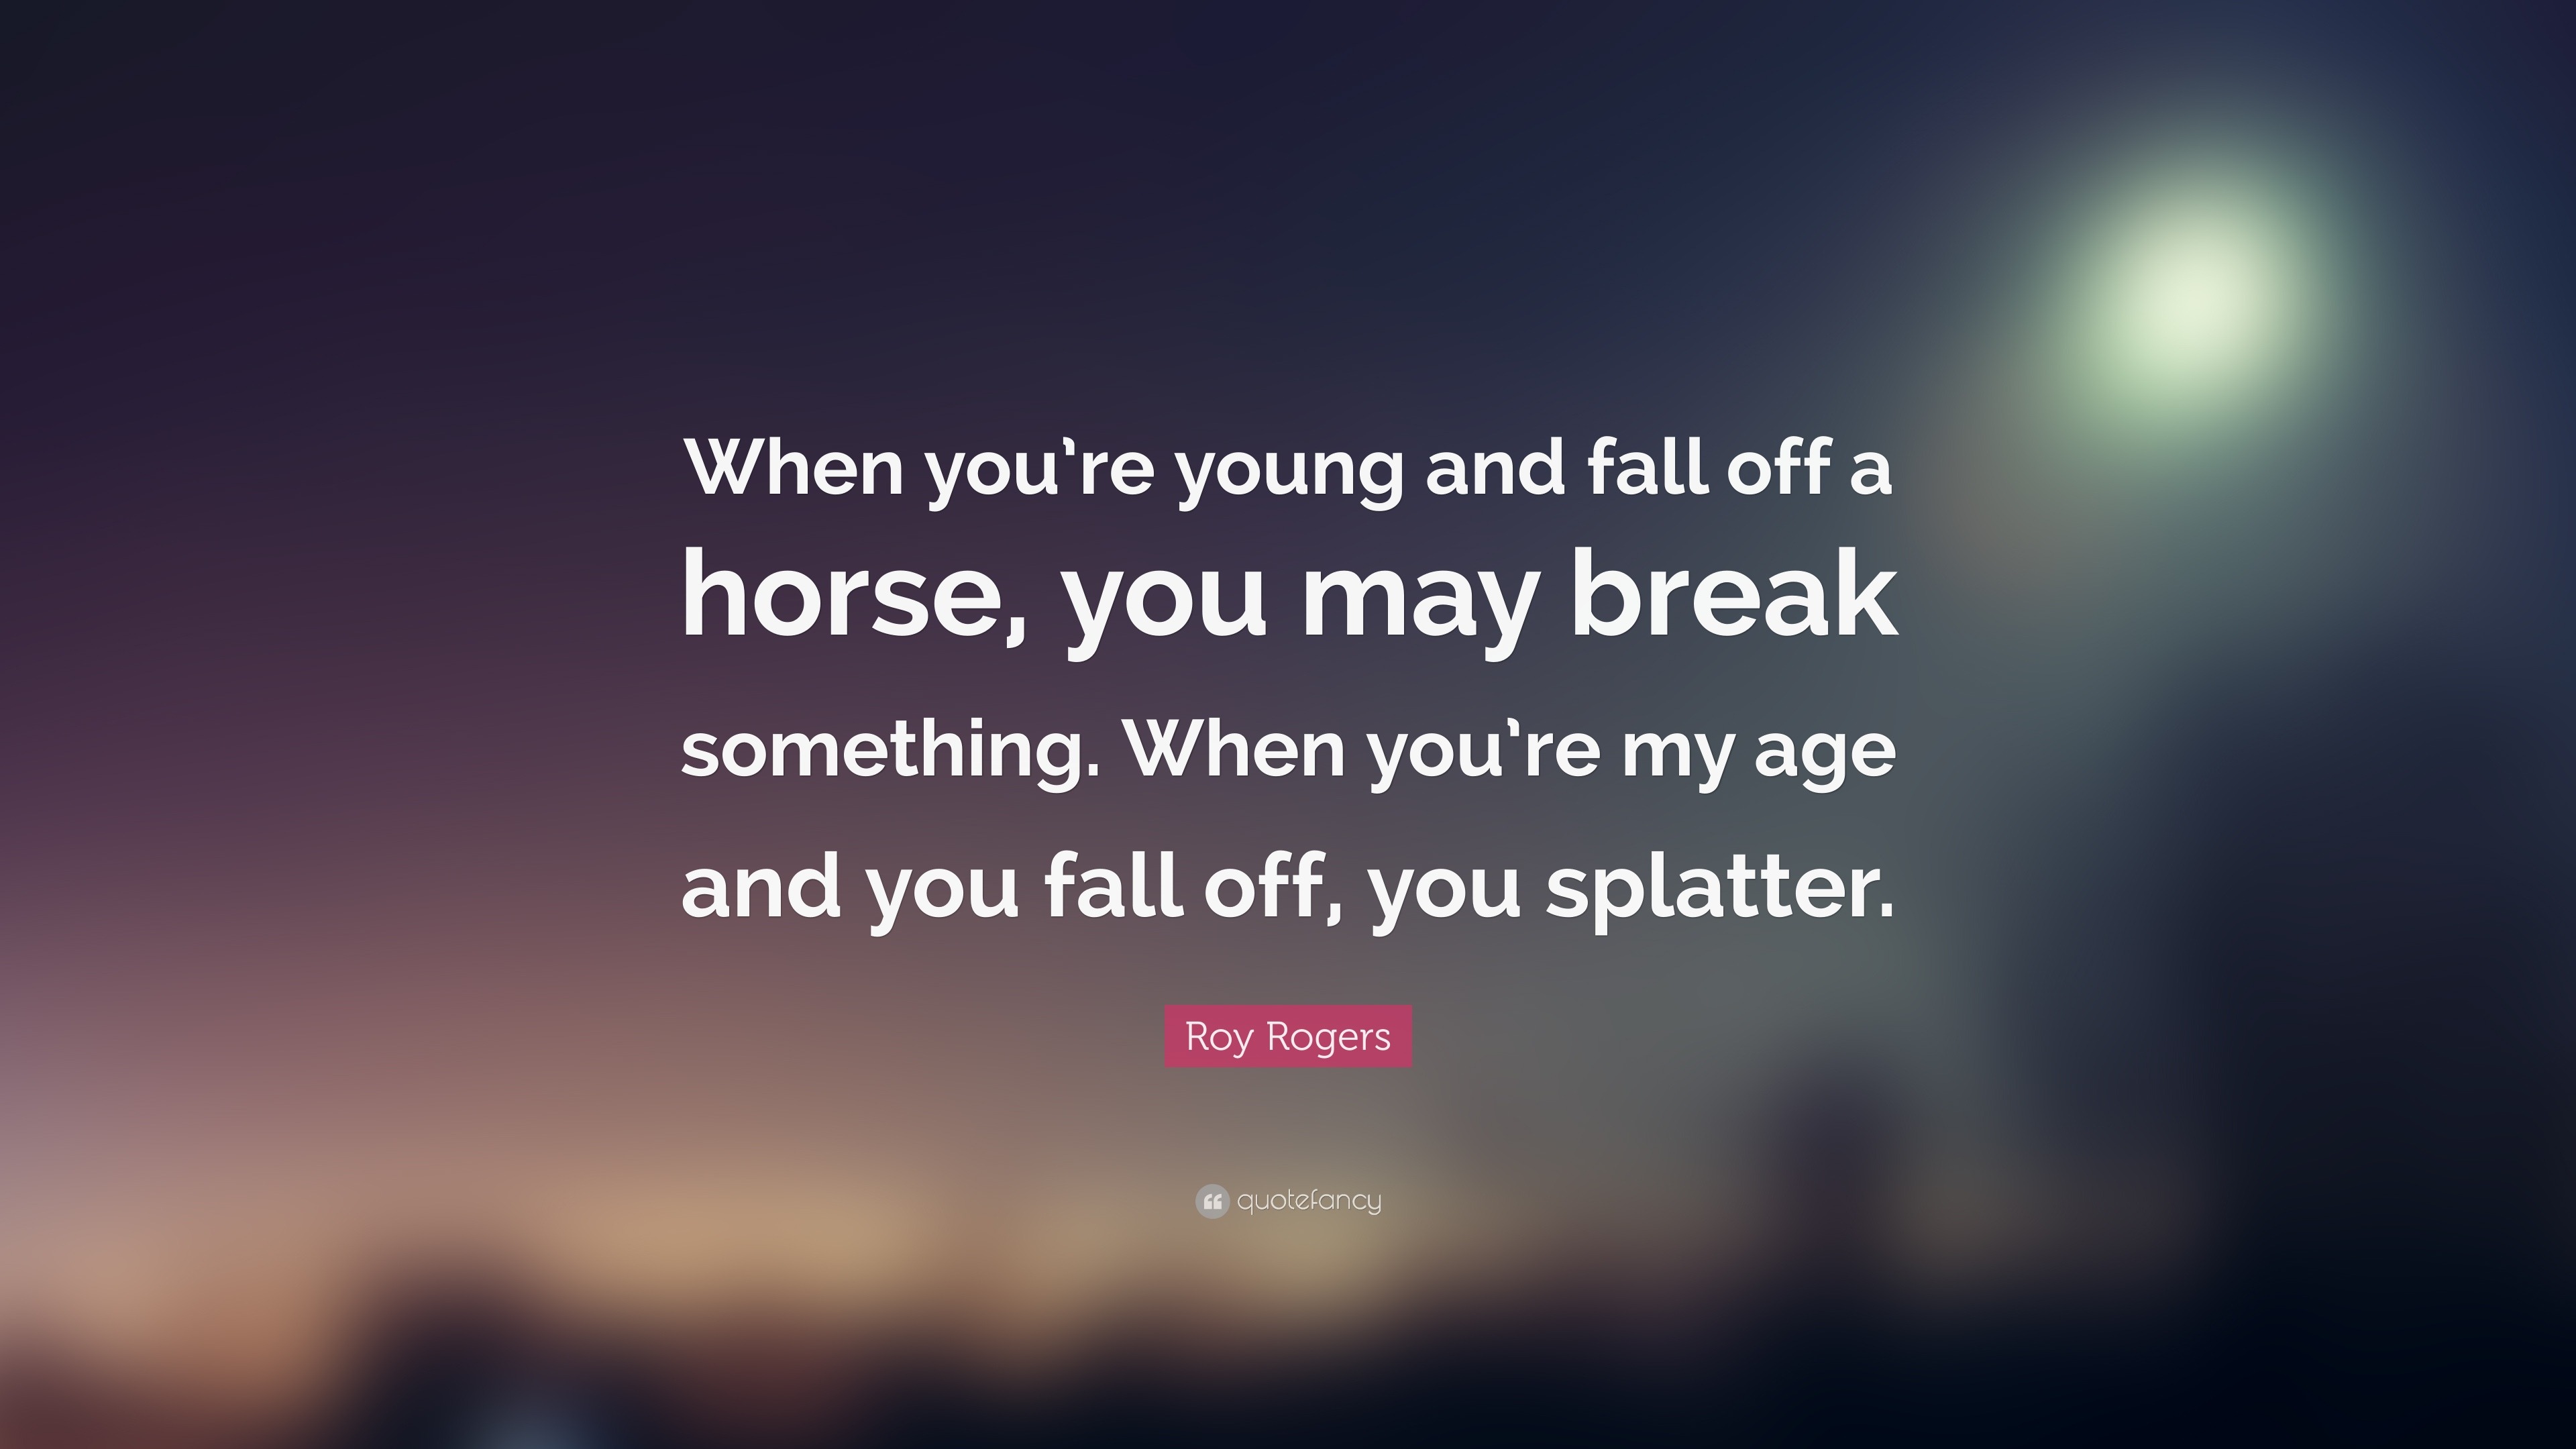 Roy Rogers Quote: “When you’re young and fall off a horse, you may break something. When you’re ...